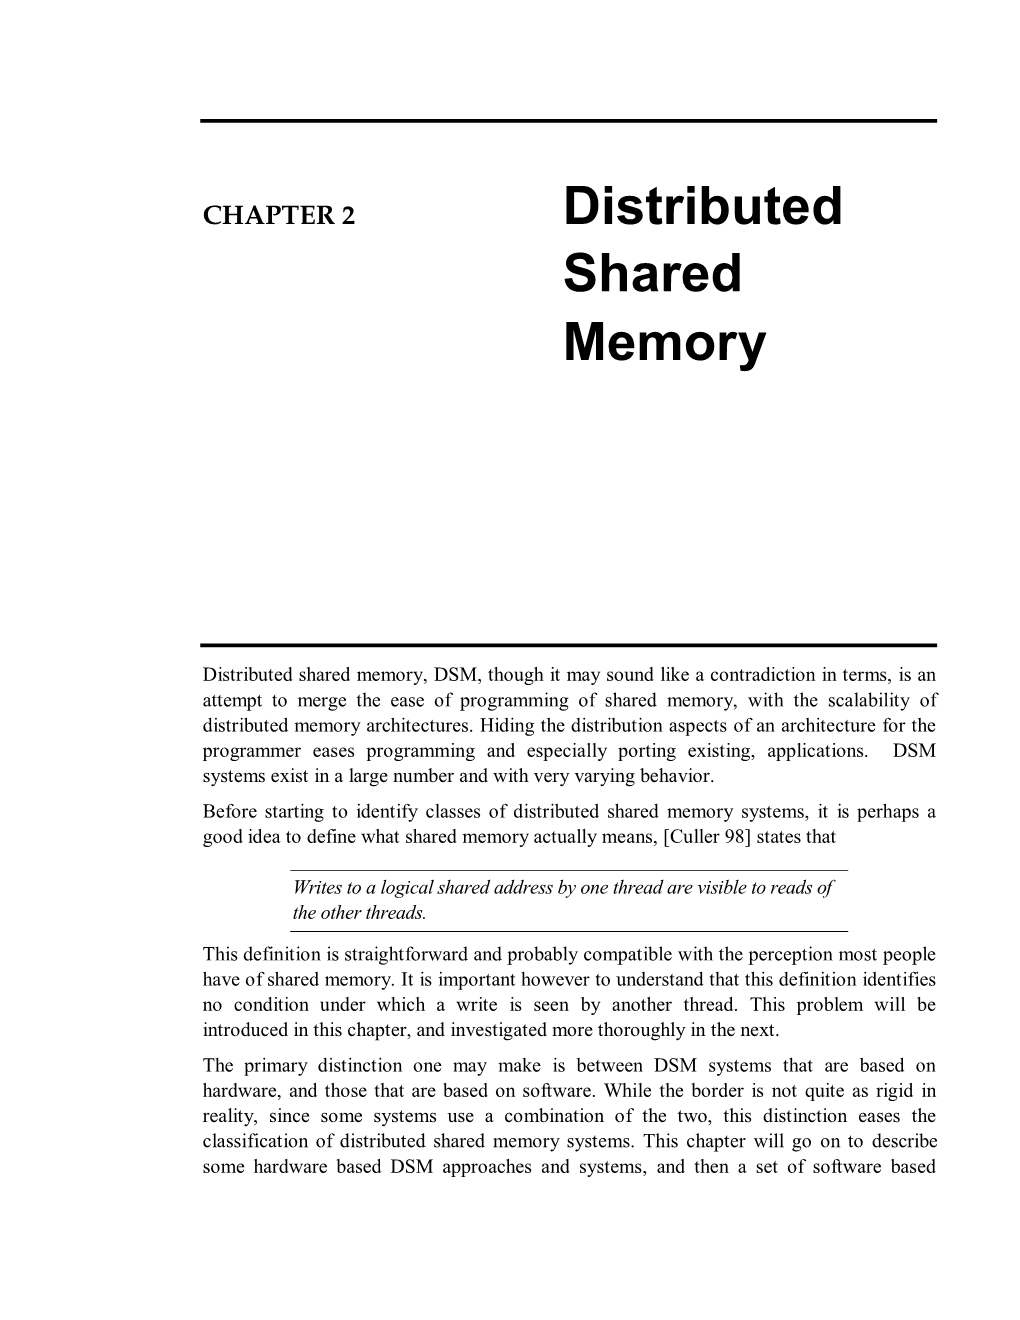 Distributed Shared Memory